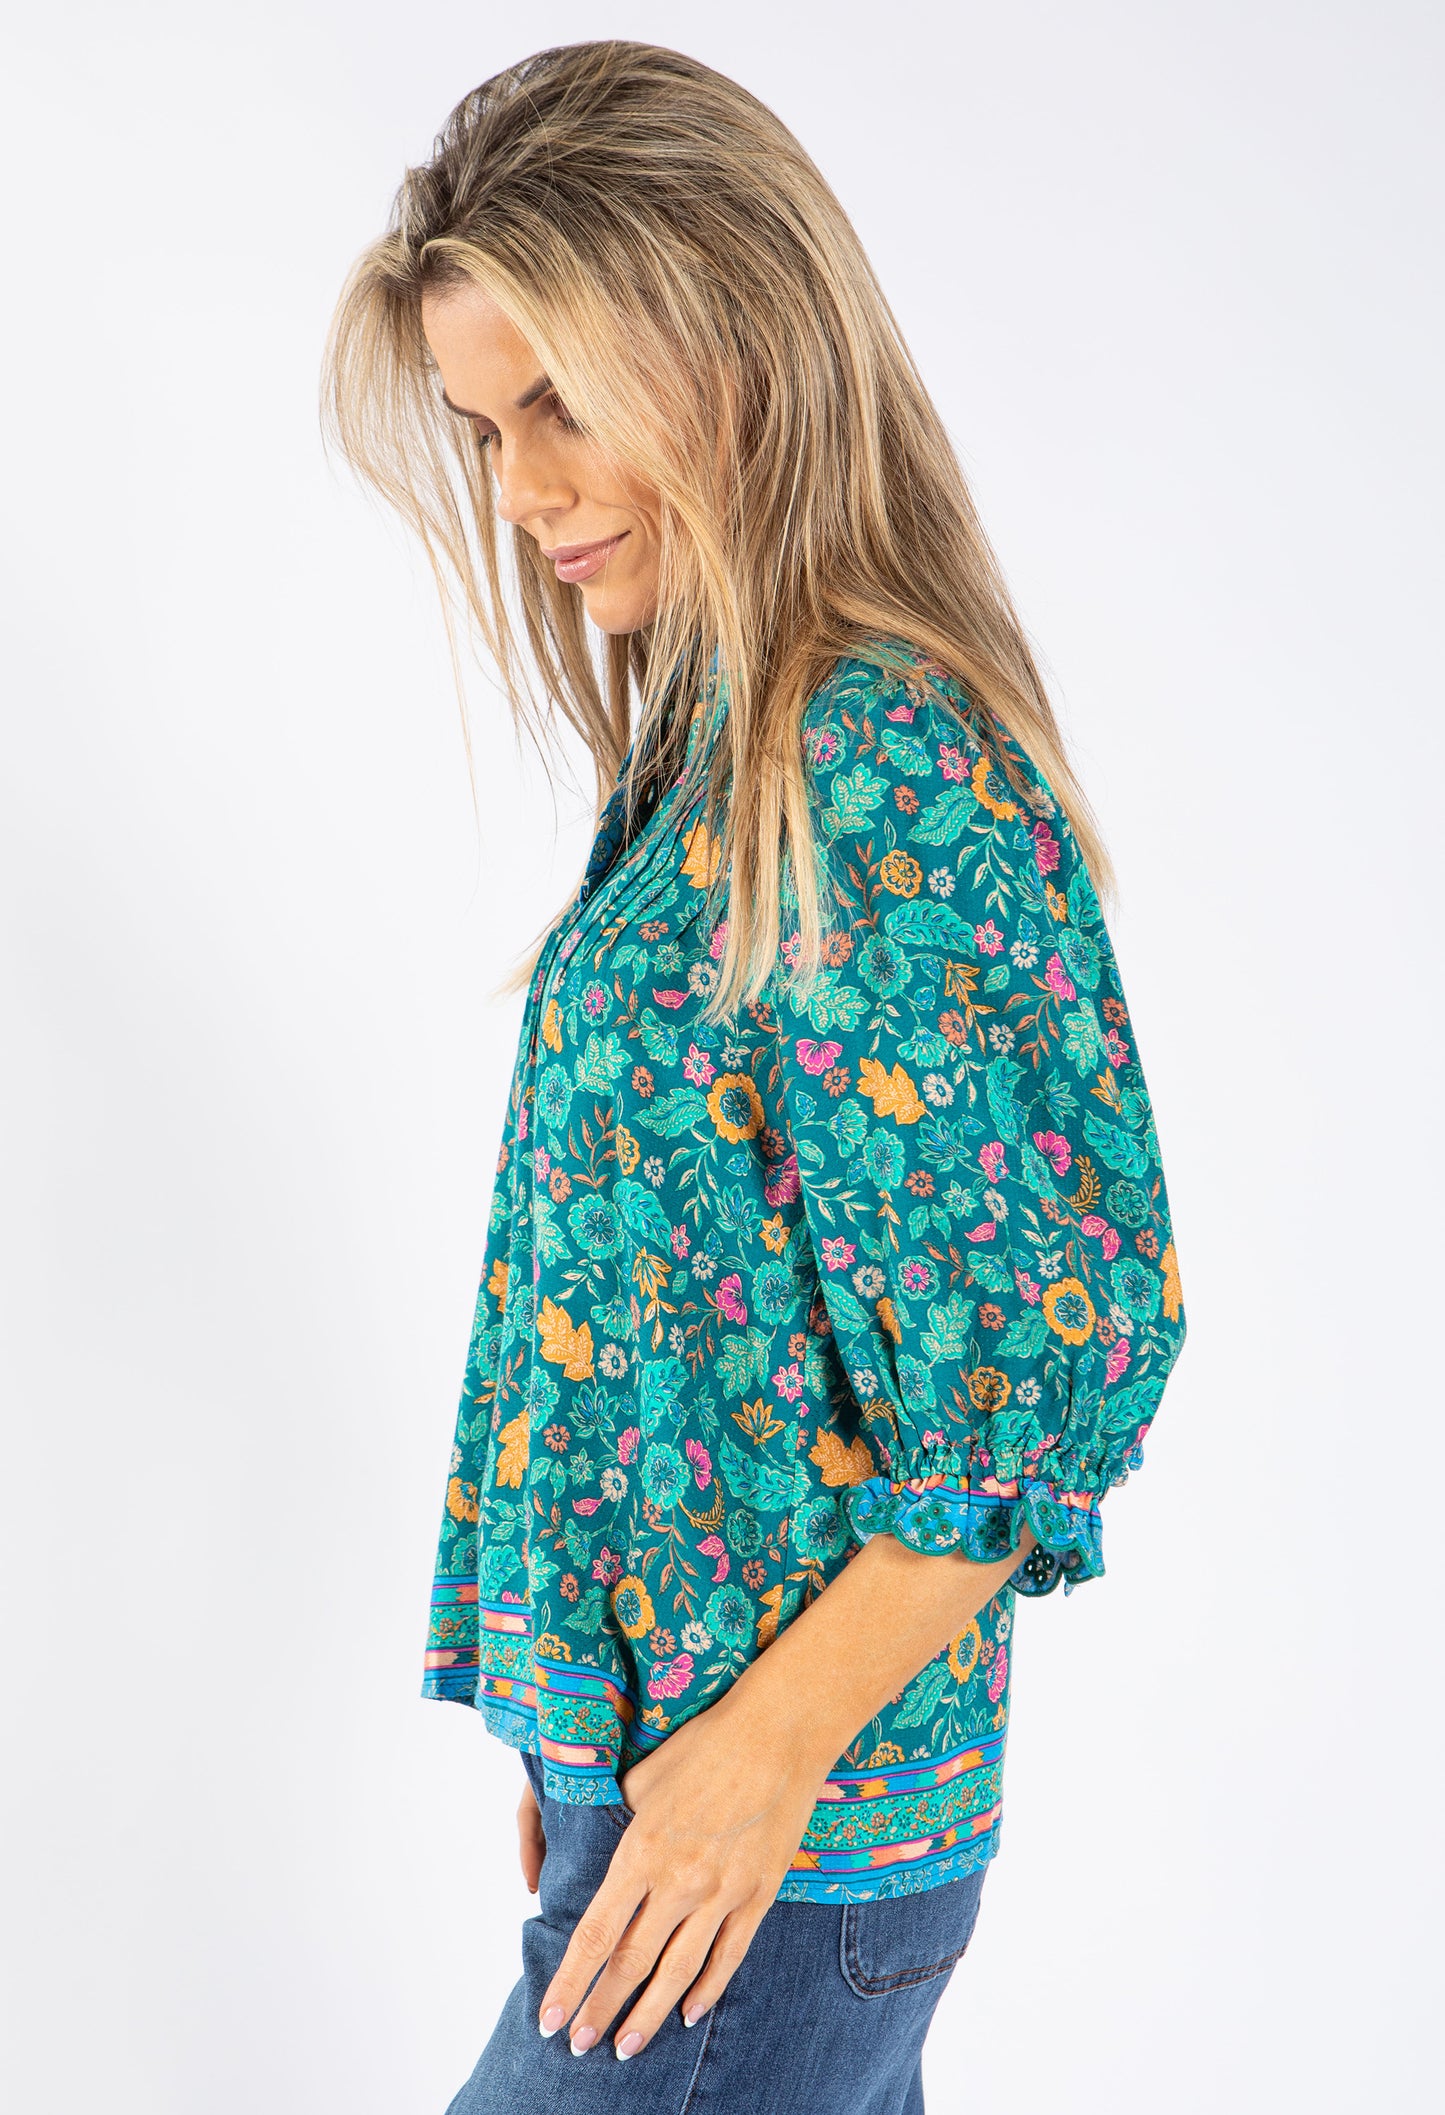 Floral Frill Top